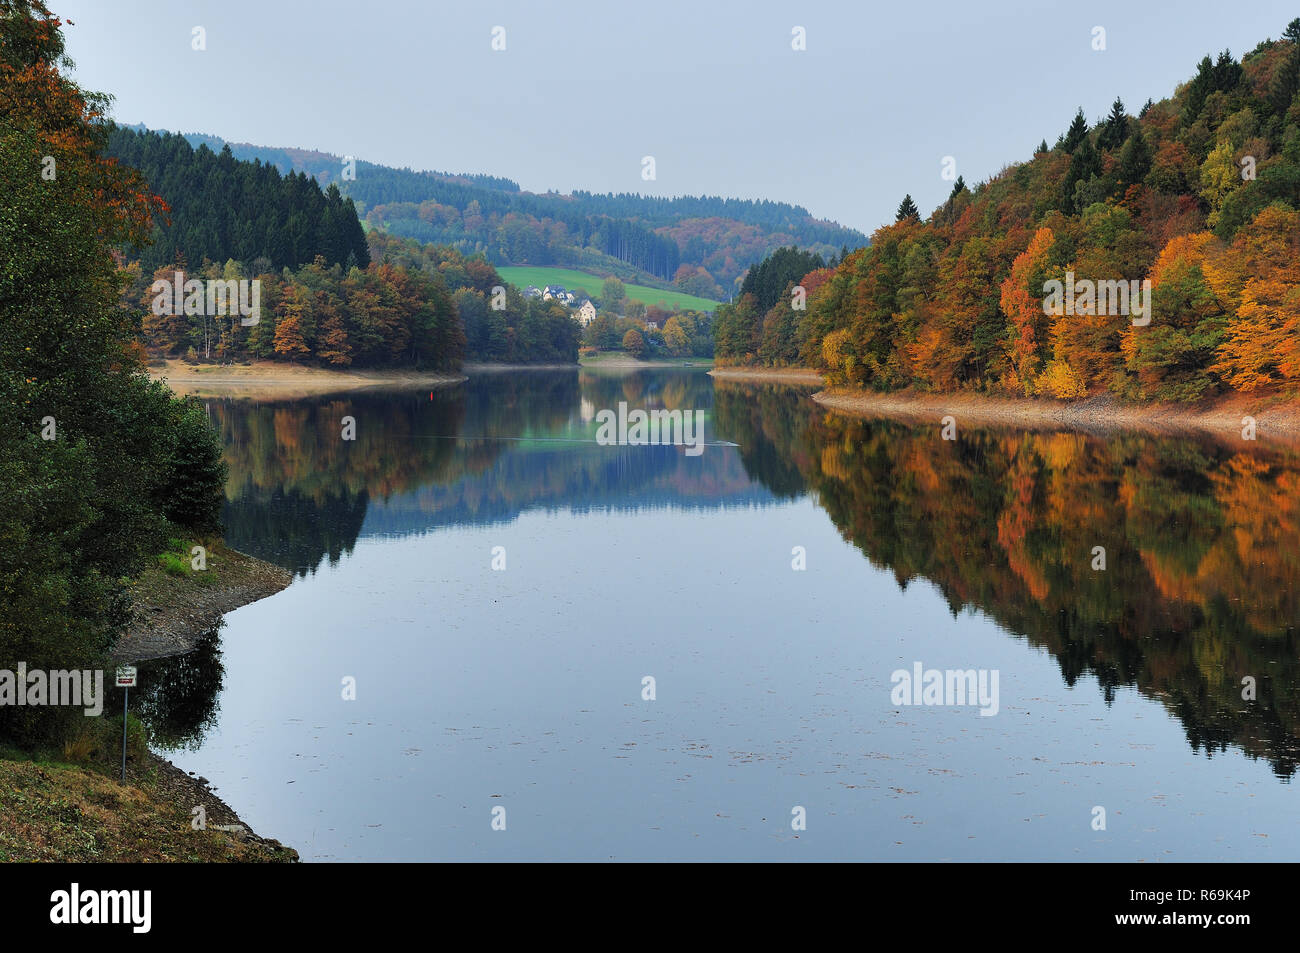 Fall At The Aggertalsperre Genkeltal Stock Photo